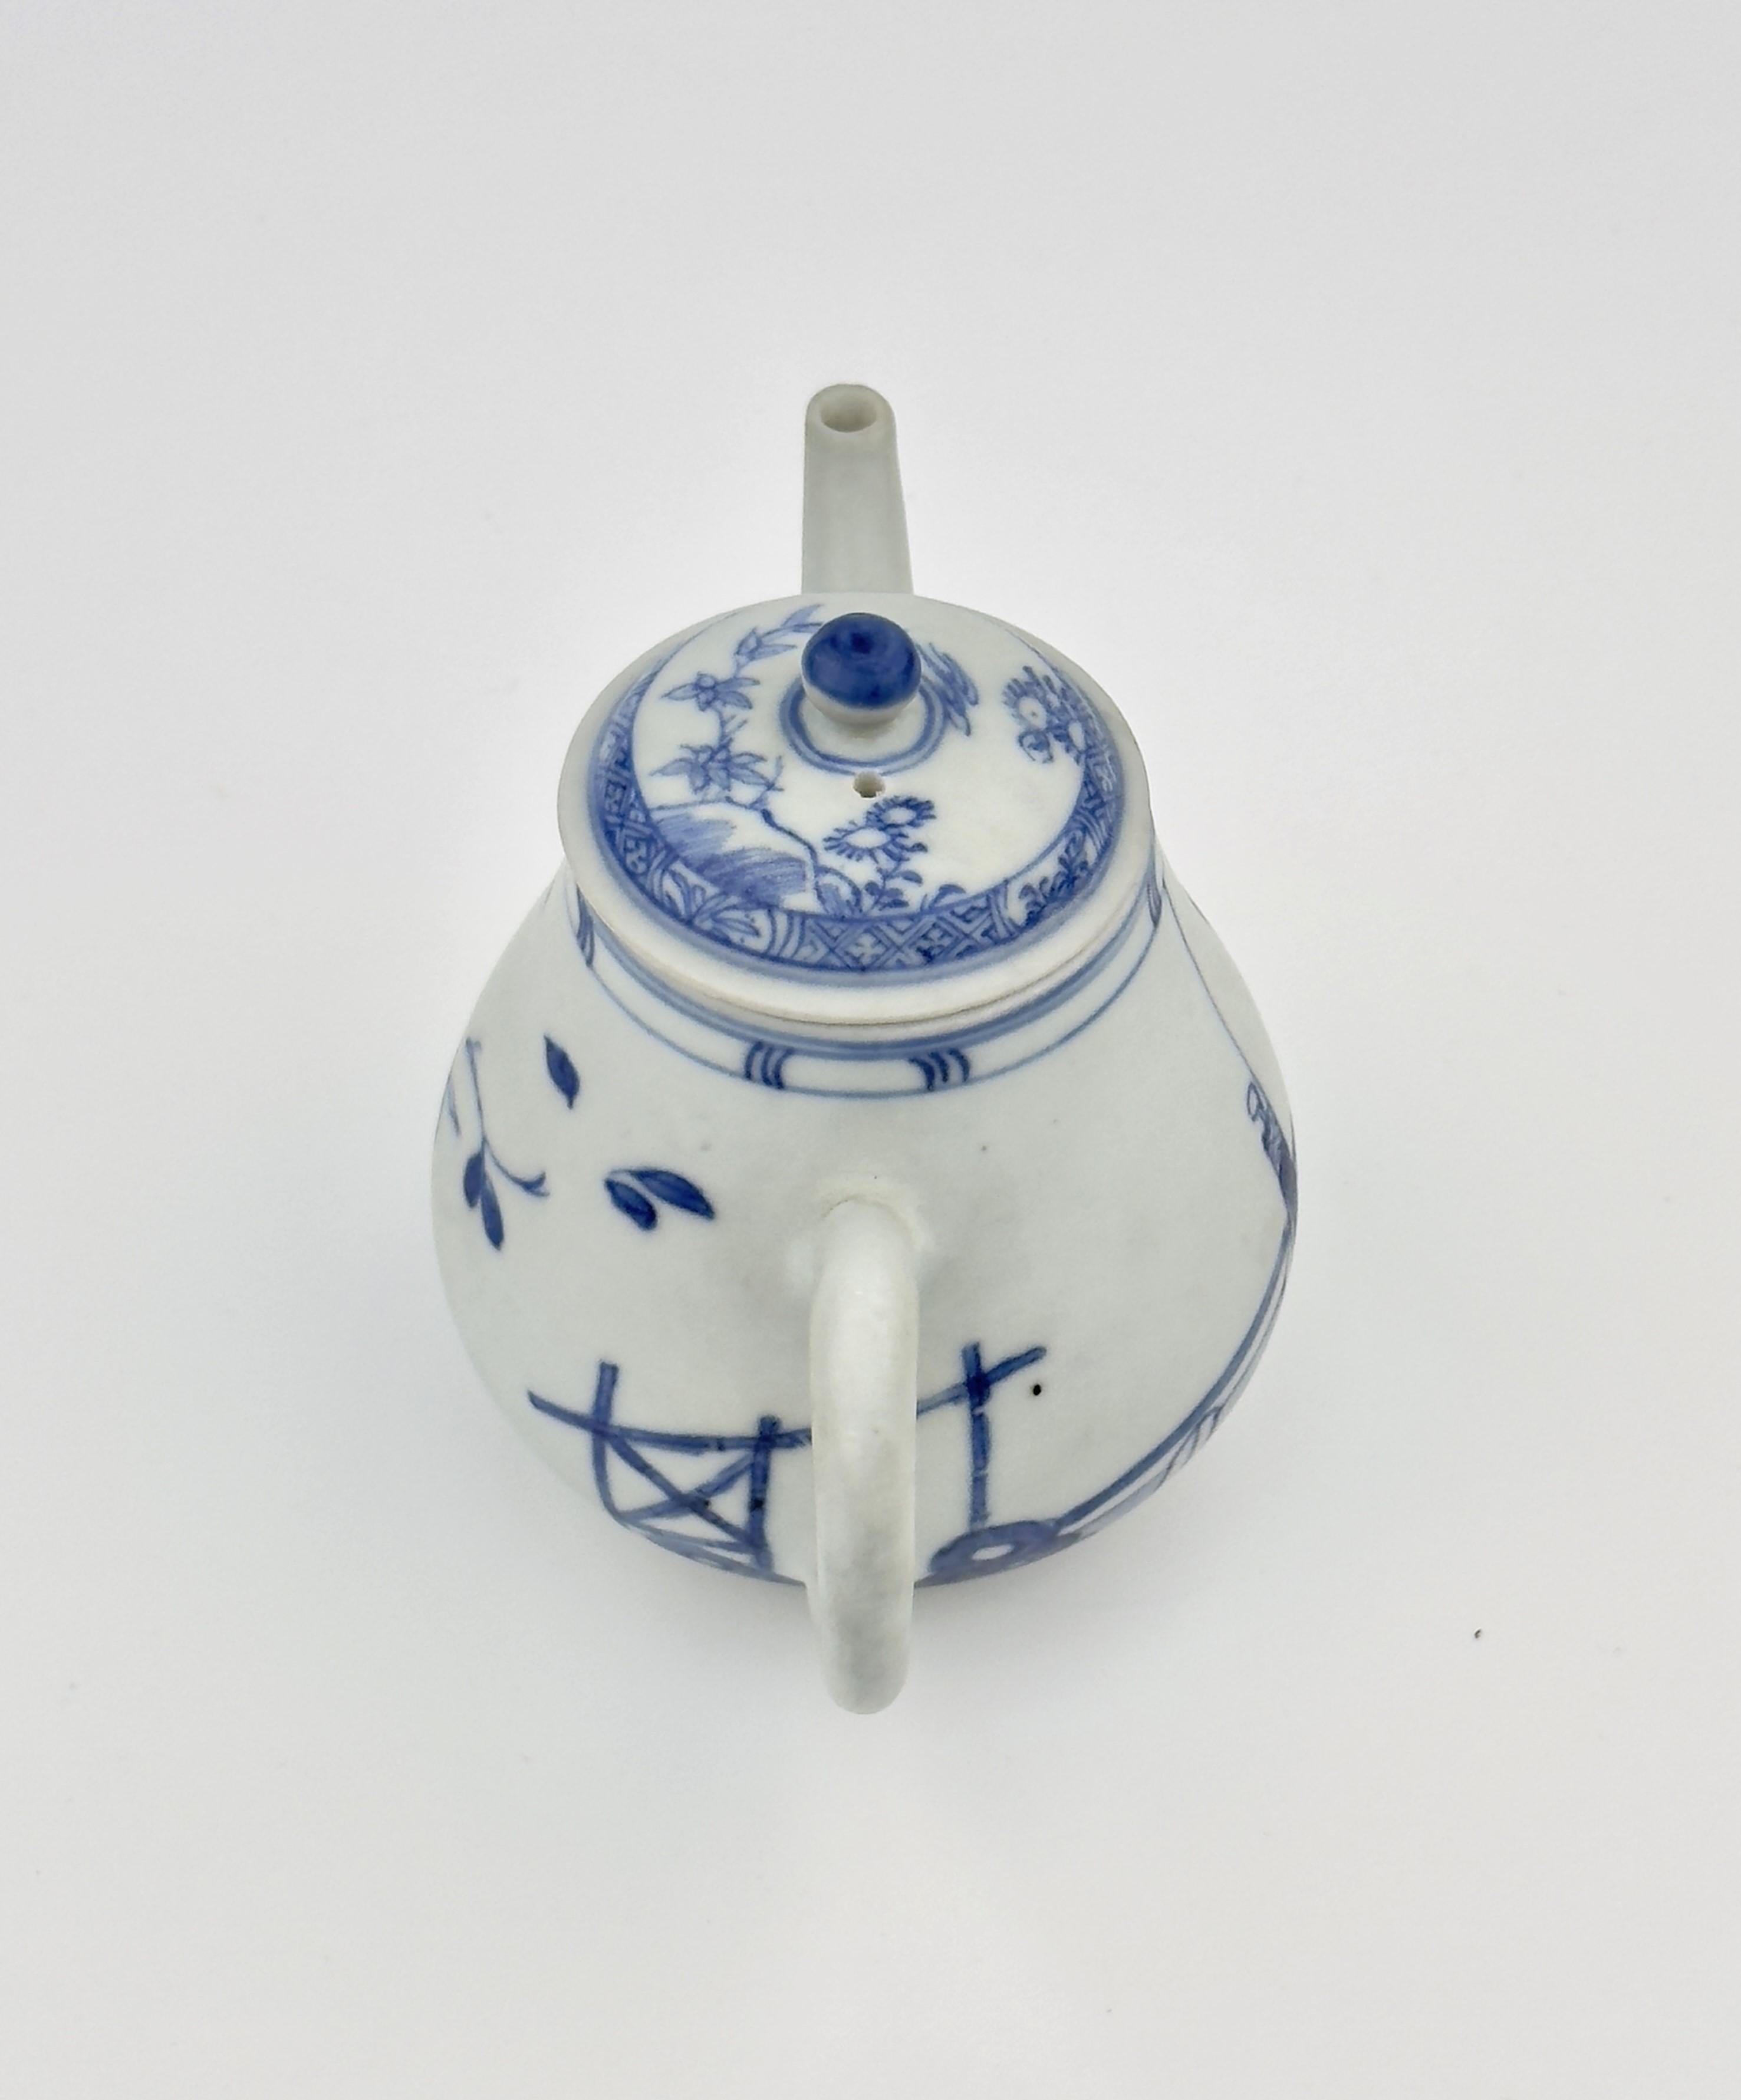 'Imari Pavilion' Pattern Blue And White Teapot C 1725, Qing Dynasty, Yongzheng In Good Condition For Sale In seoul, KR